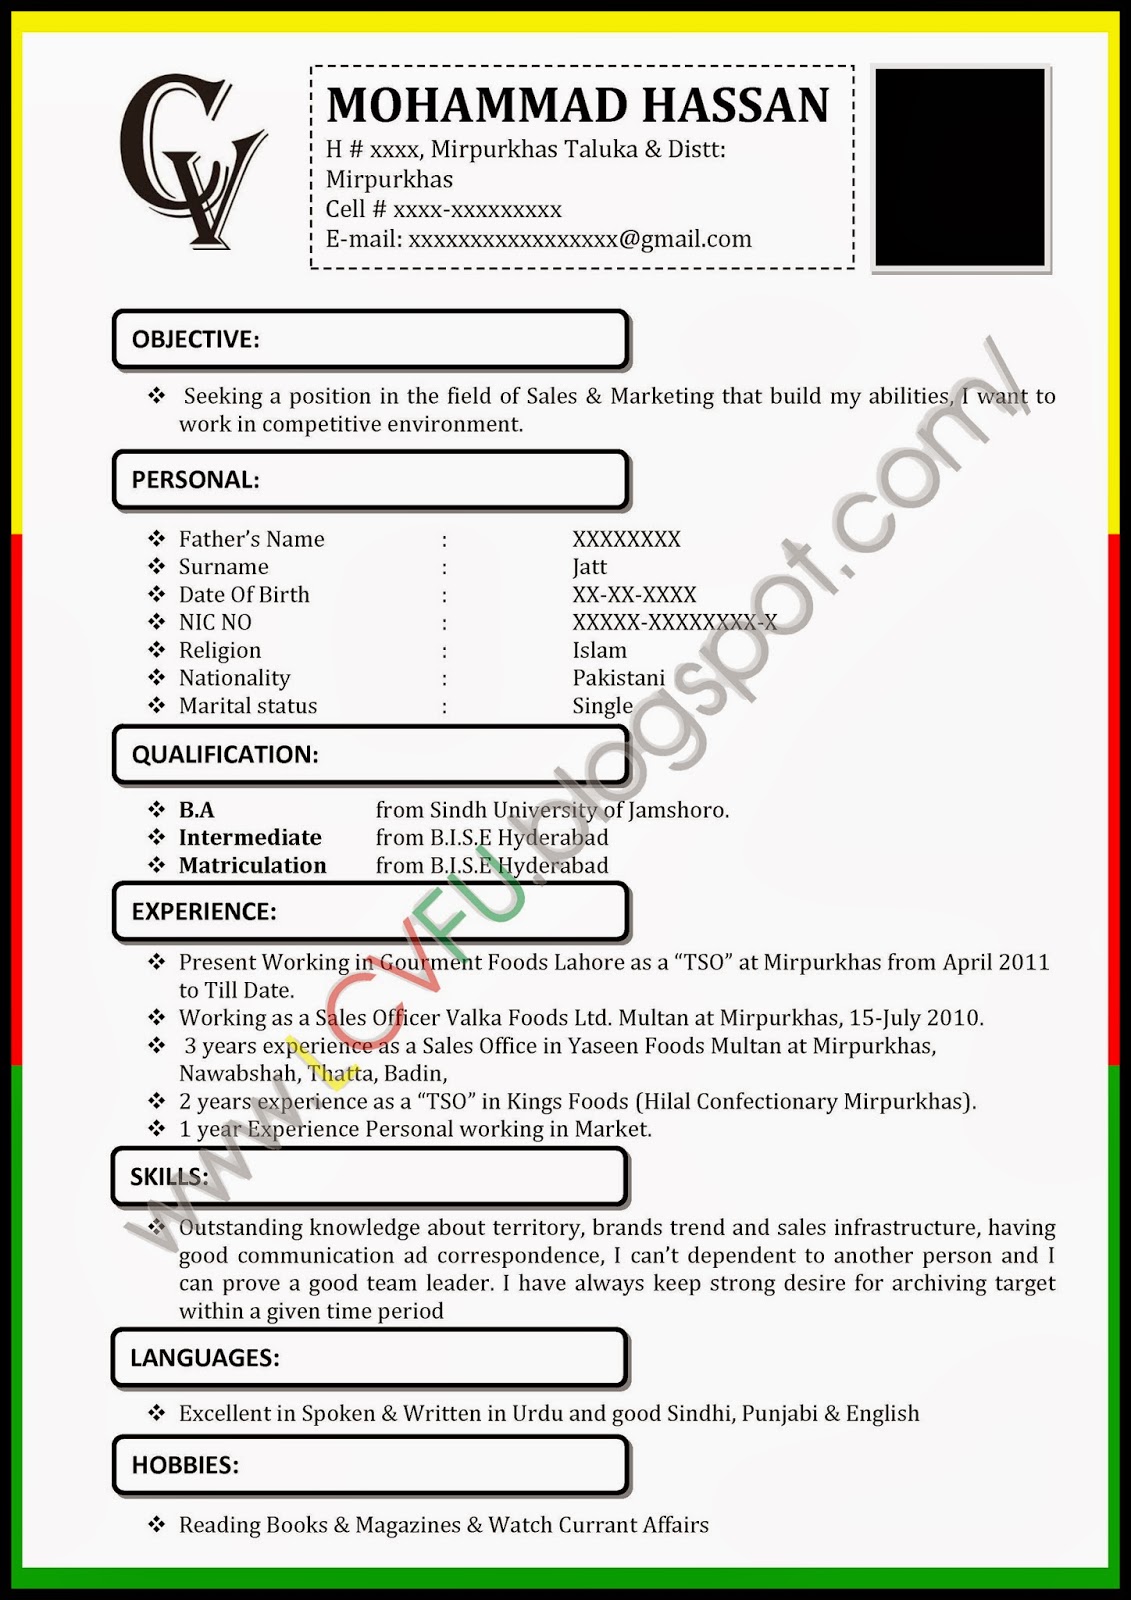 Resume new format download